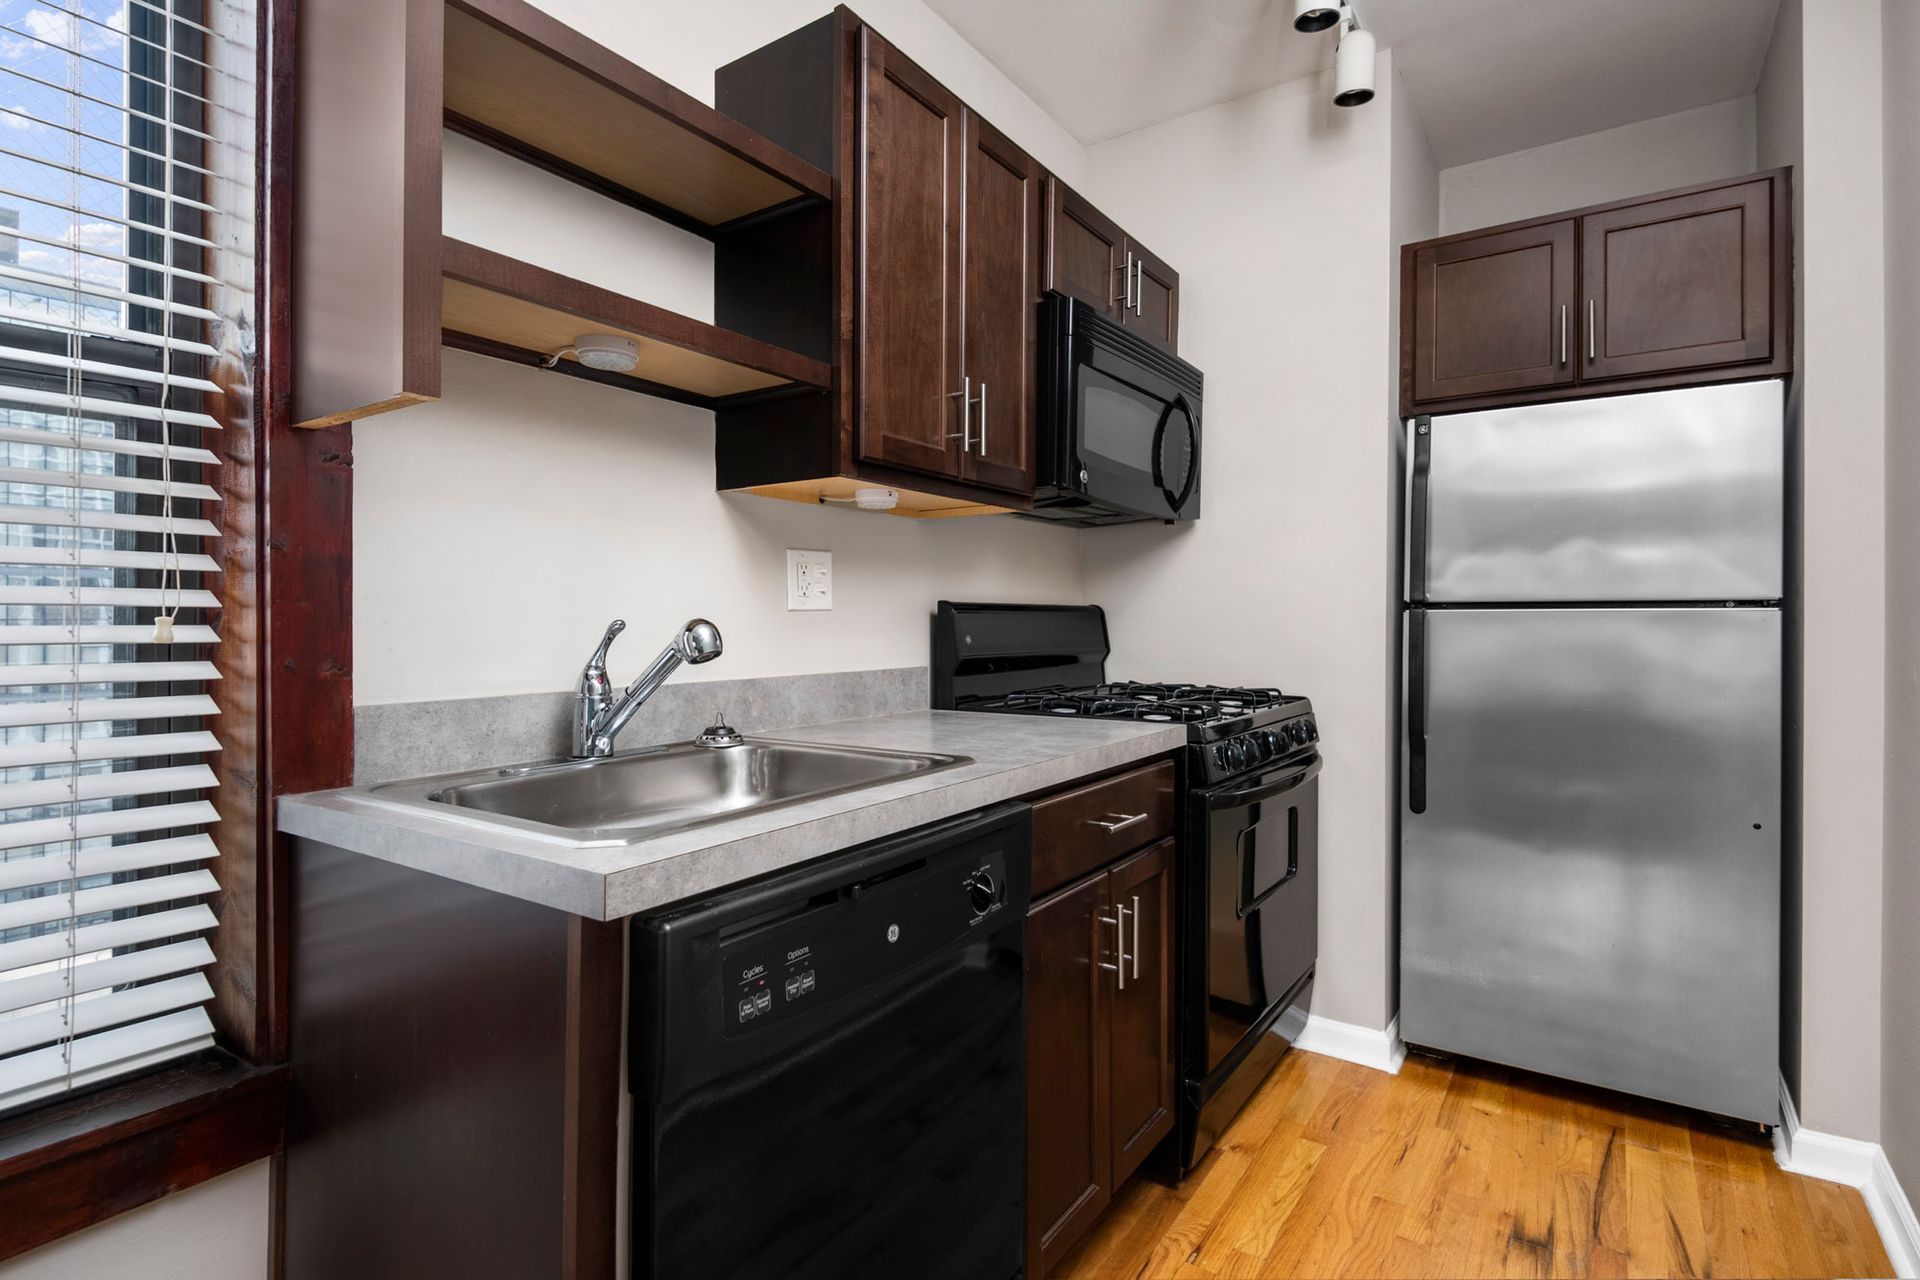 A kitchen with stainless steel appliances and wooden floors at Reside at Belmont Harbor. 